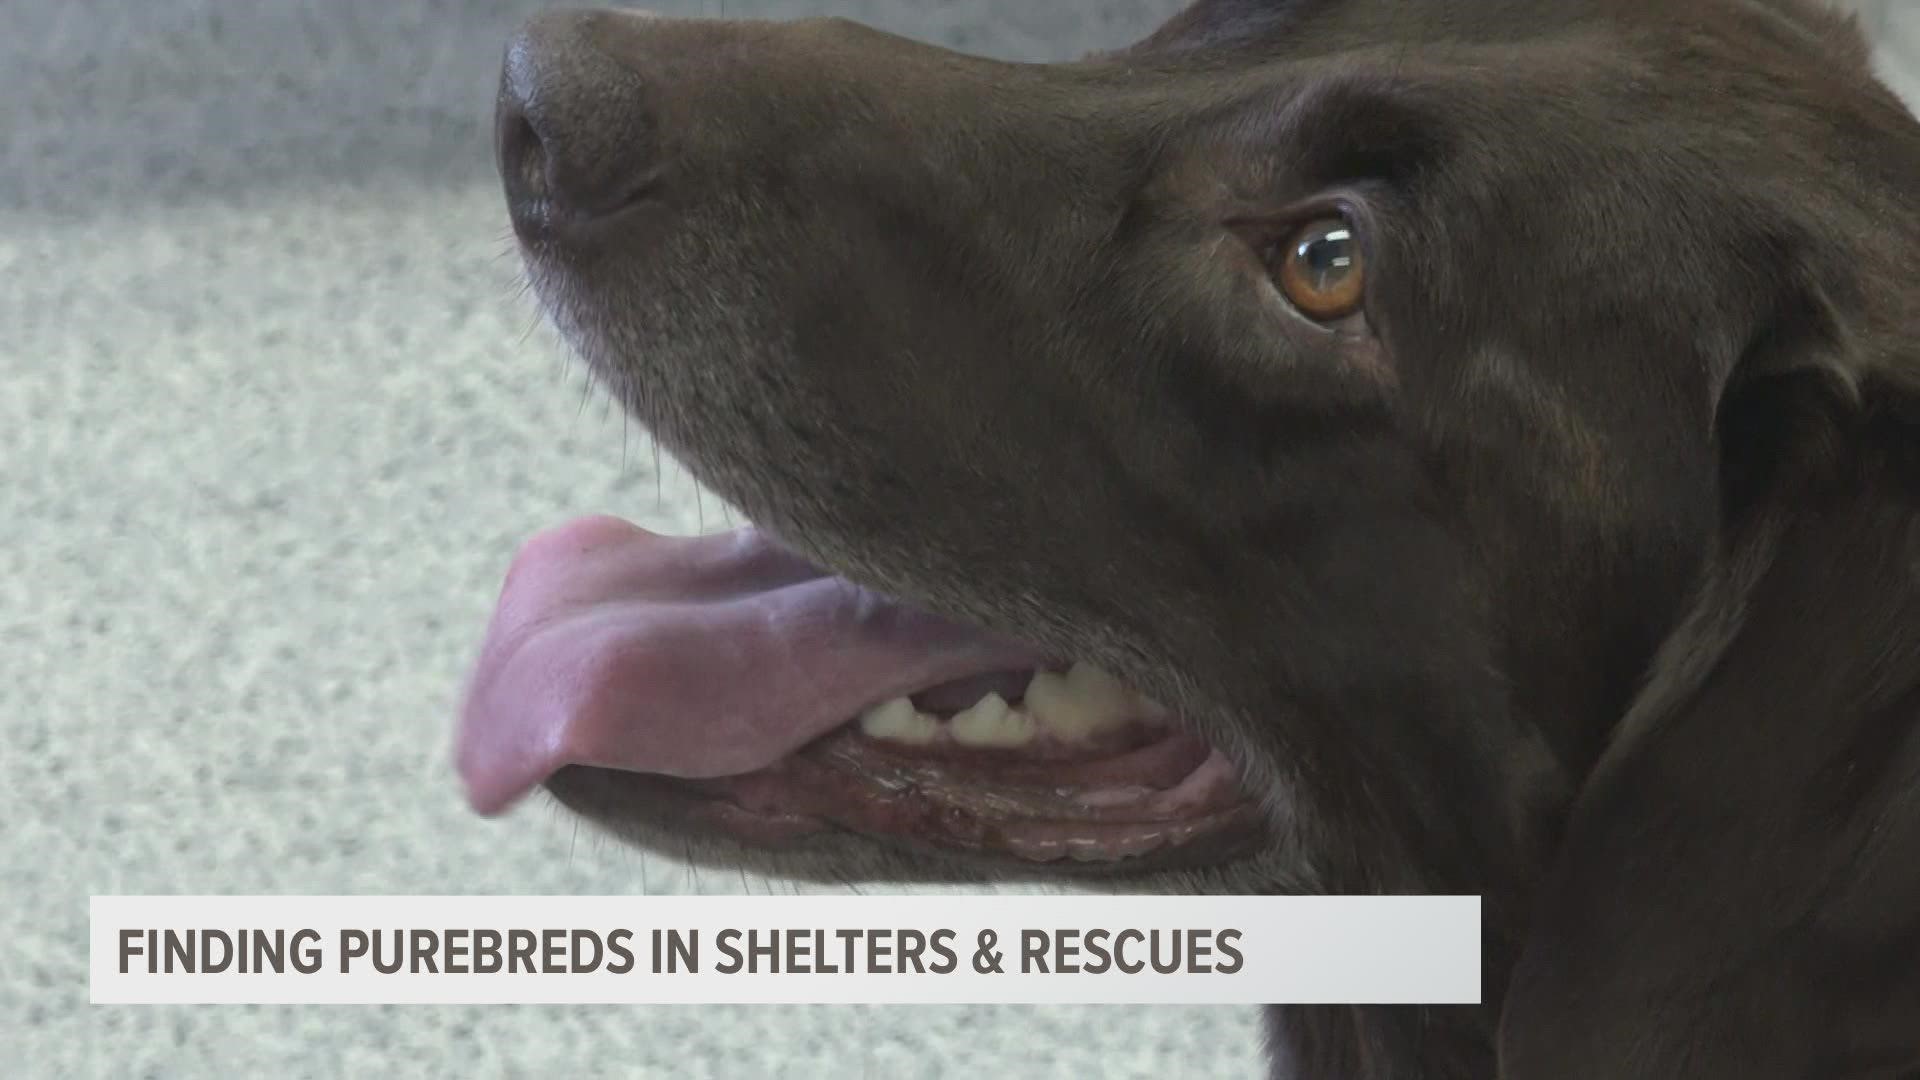 It’s estimated that around 20-30% of all shelter dogs are purebreds.